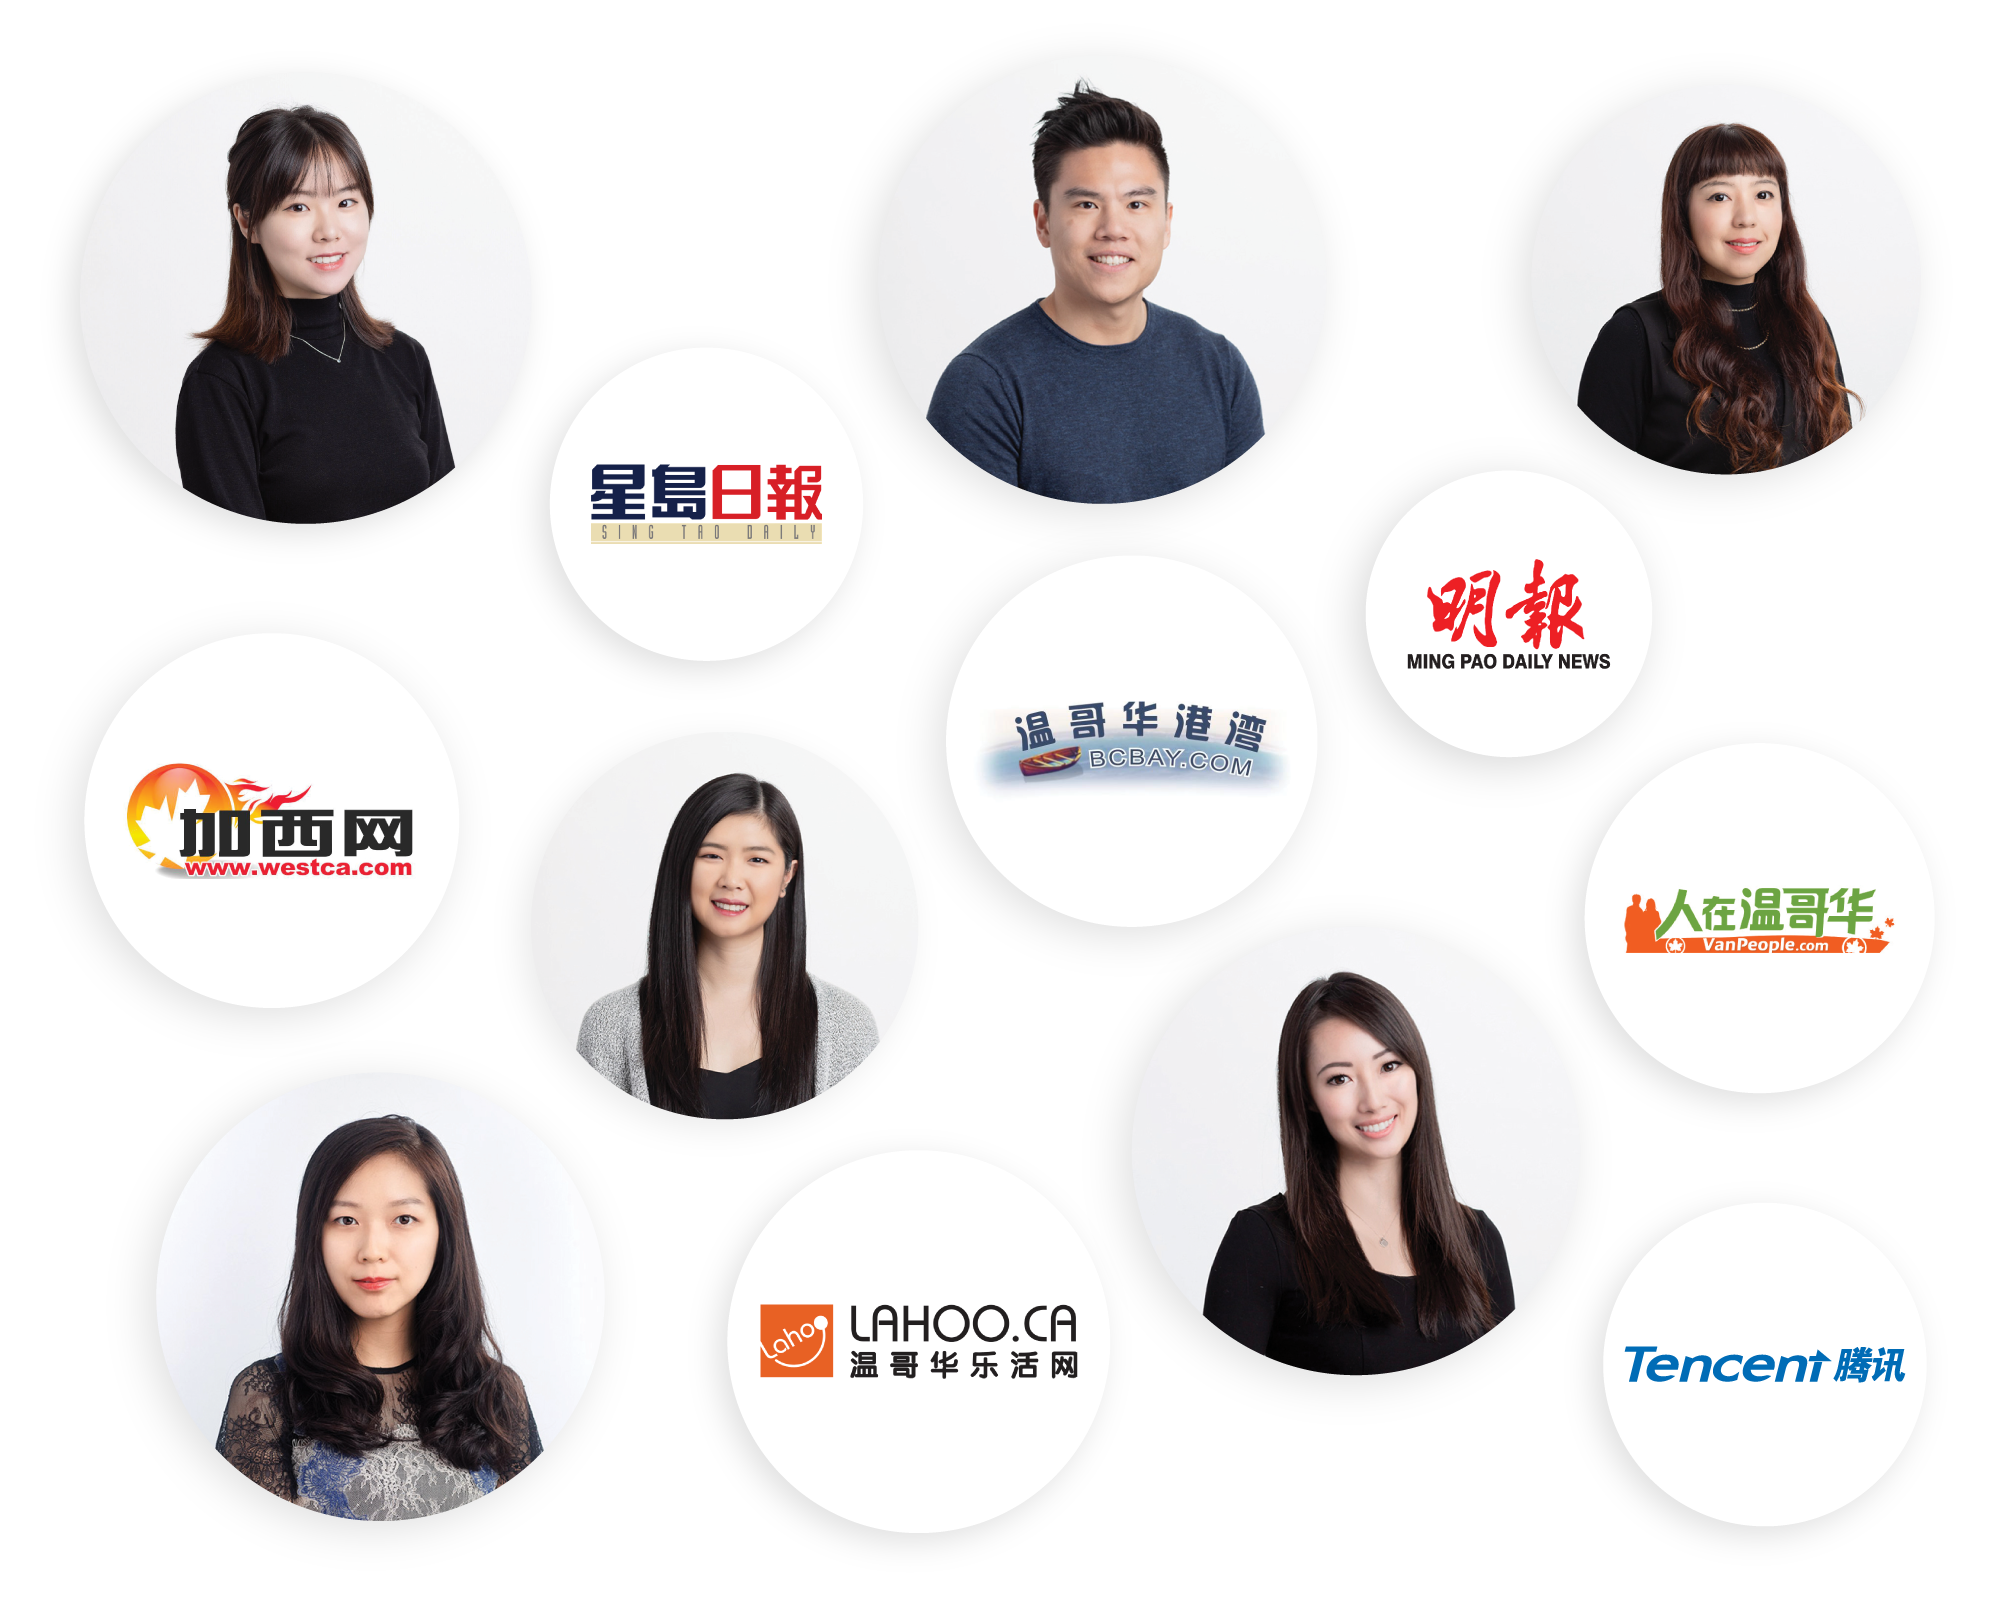 Data-Driven Team of WeChat Experts